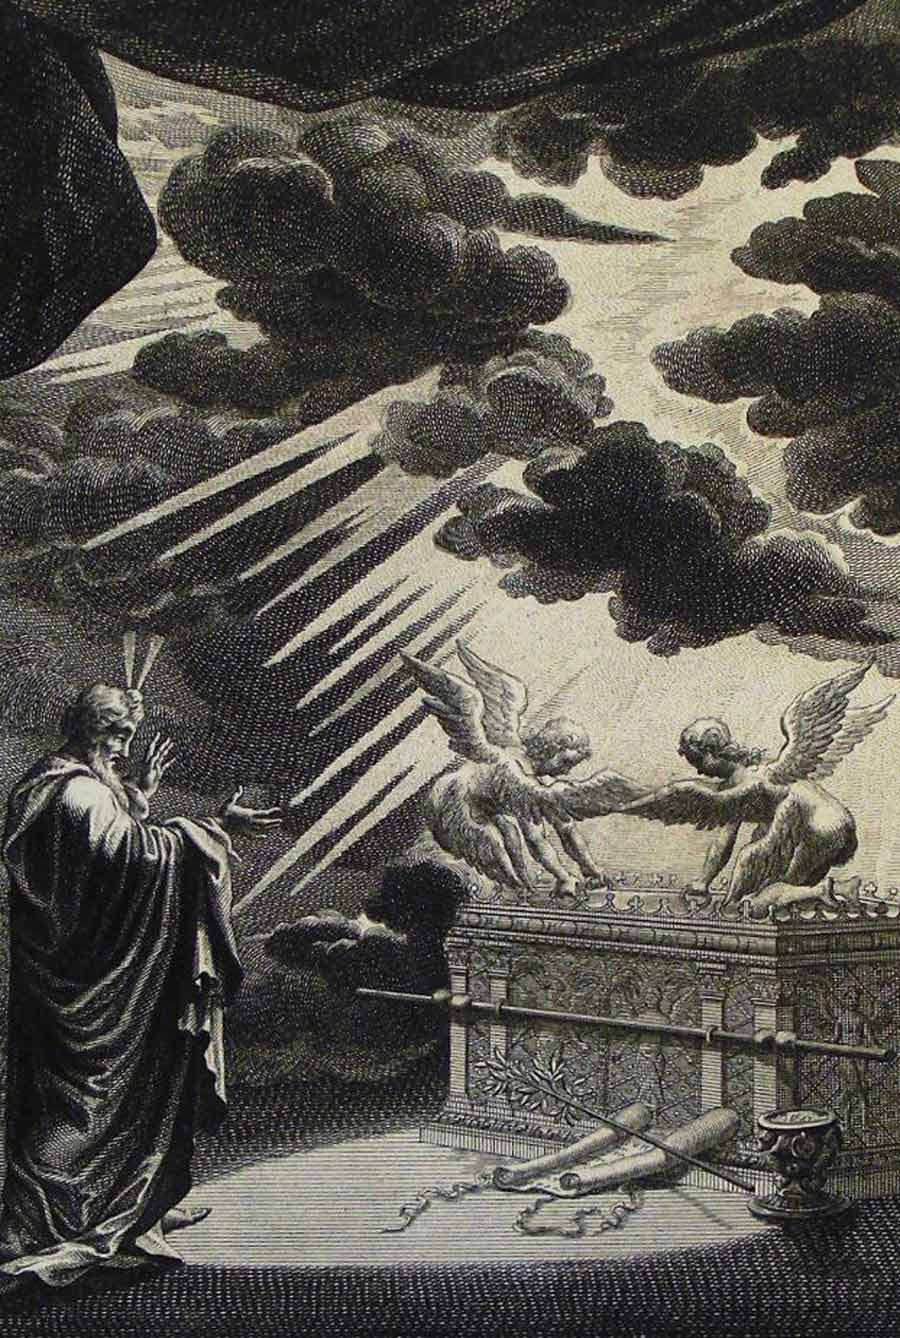 Moses speaks to Yahweh, god of the Israelites, whose presence is between and above the two “cherubim” atop the ark. (Philip De Vere / CC BY-SA 3.0)